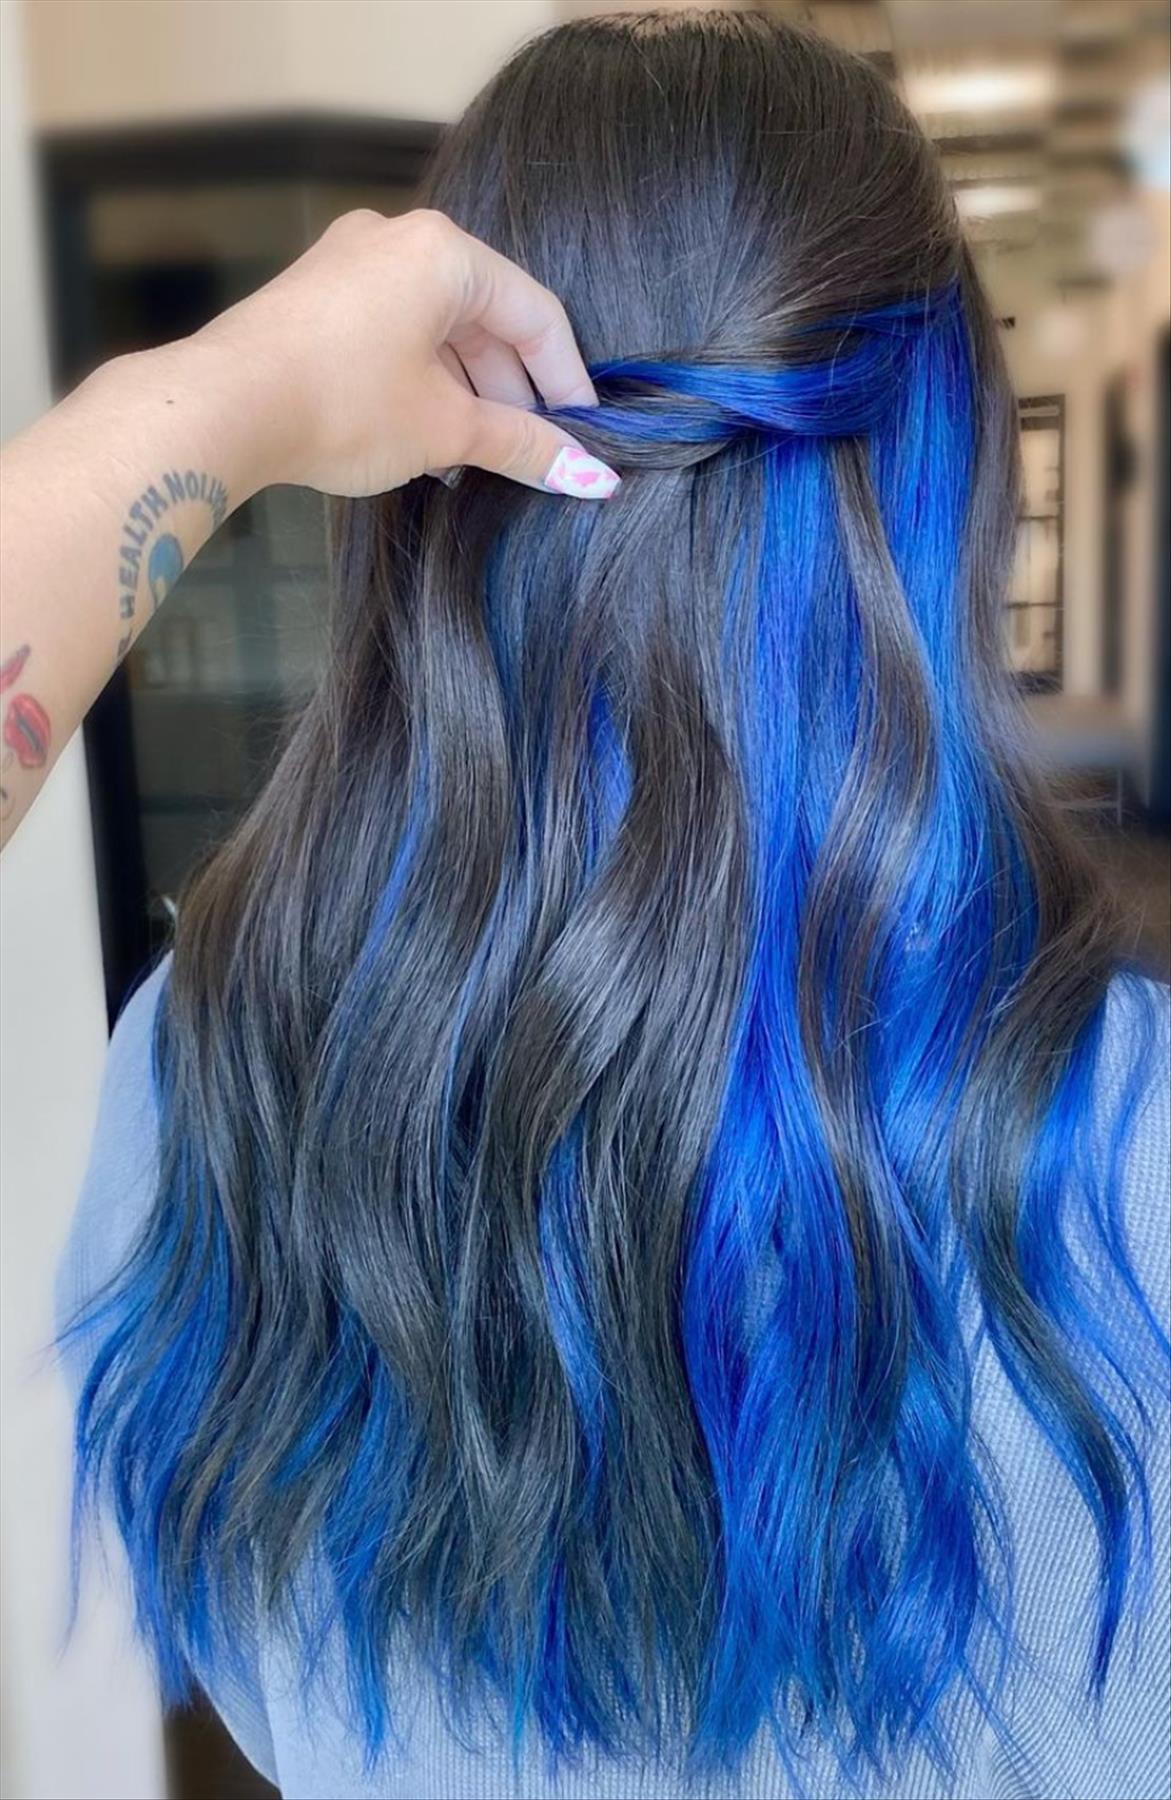 Stunning underneath hair color ideas for cool girls